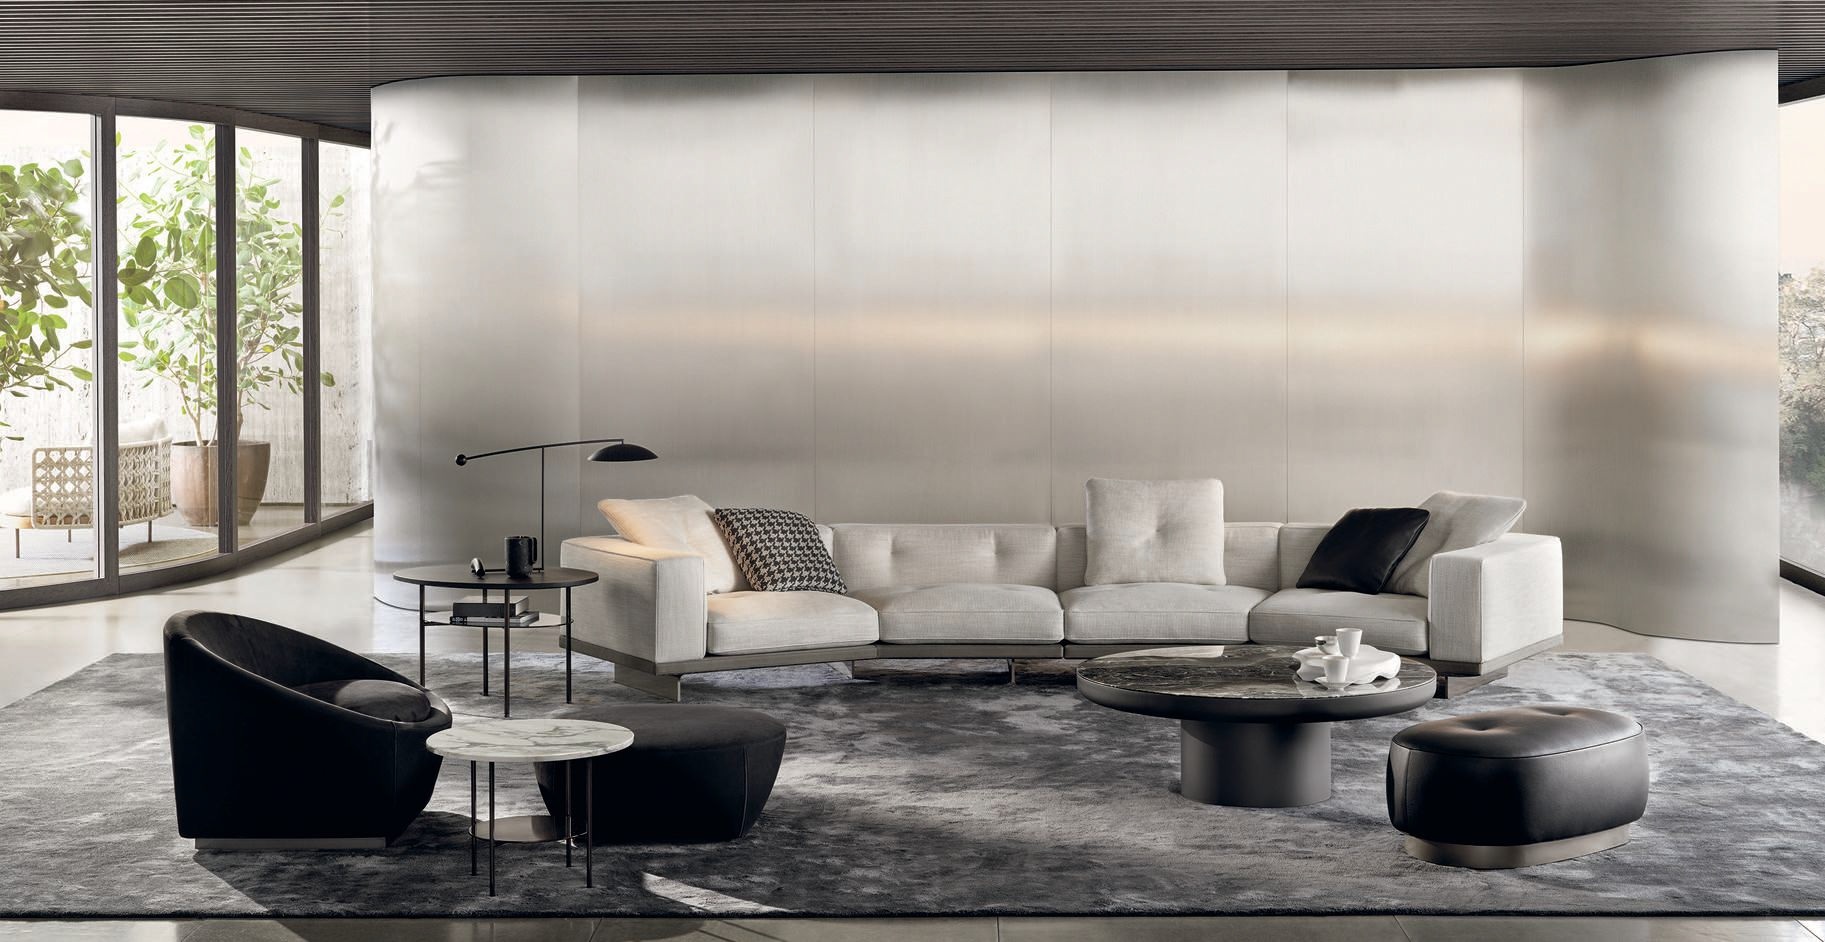 The Dylan sofa by Minotti PHOTO COURTESY OF THE BRANDS